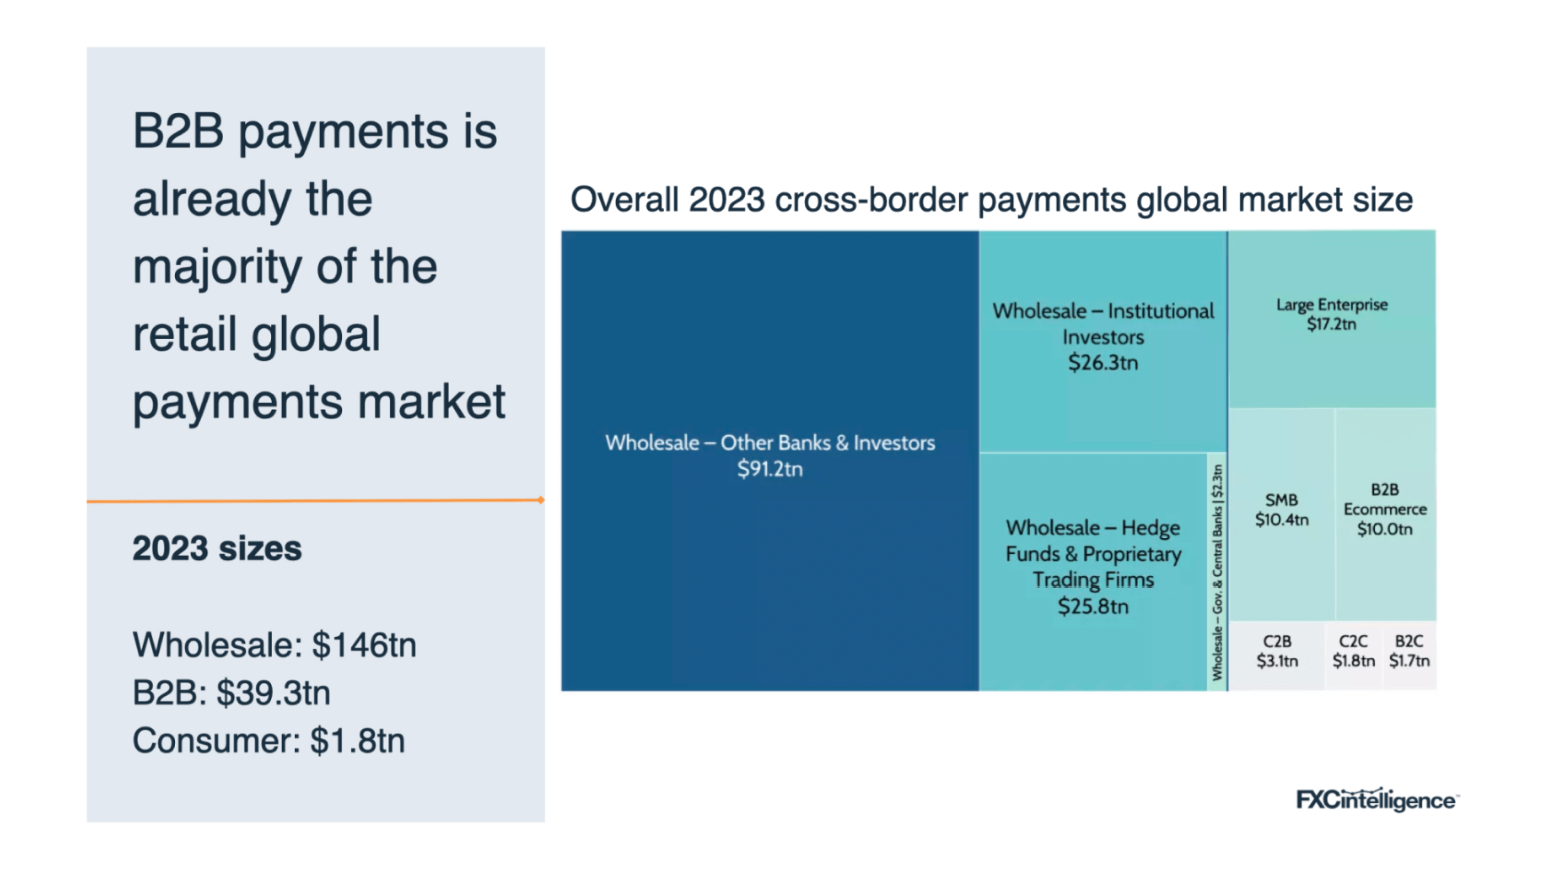 Acceleration of B2B payments